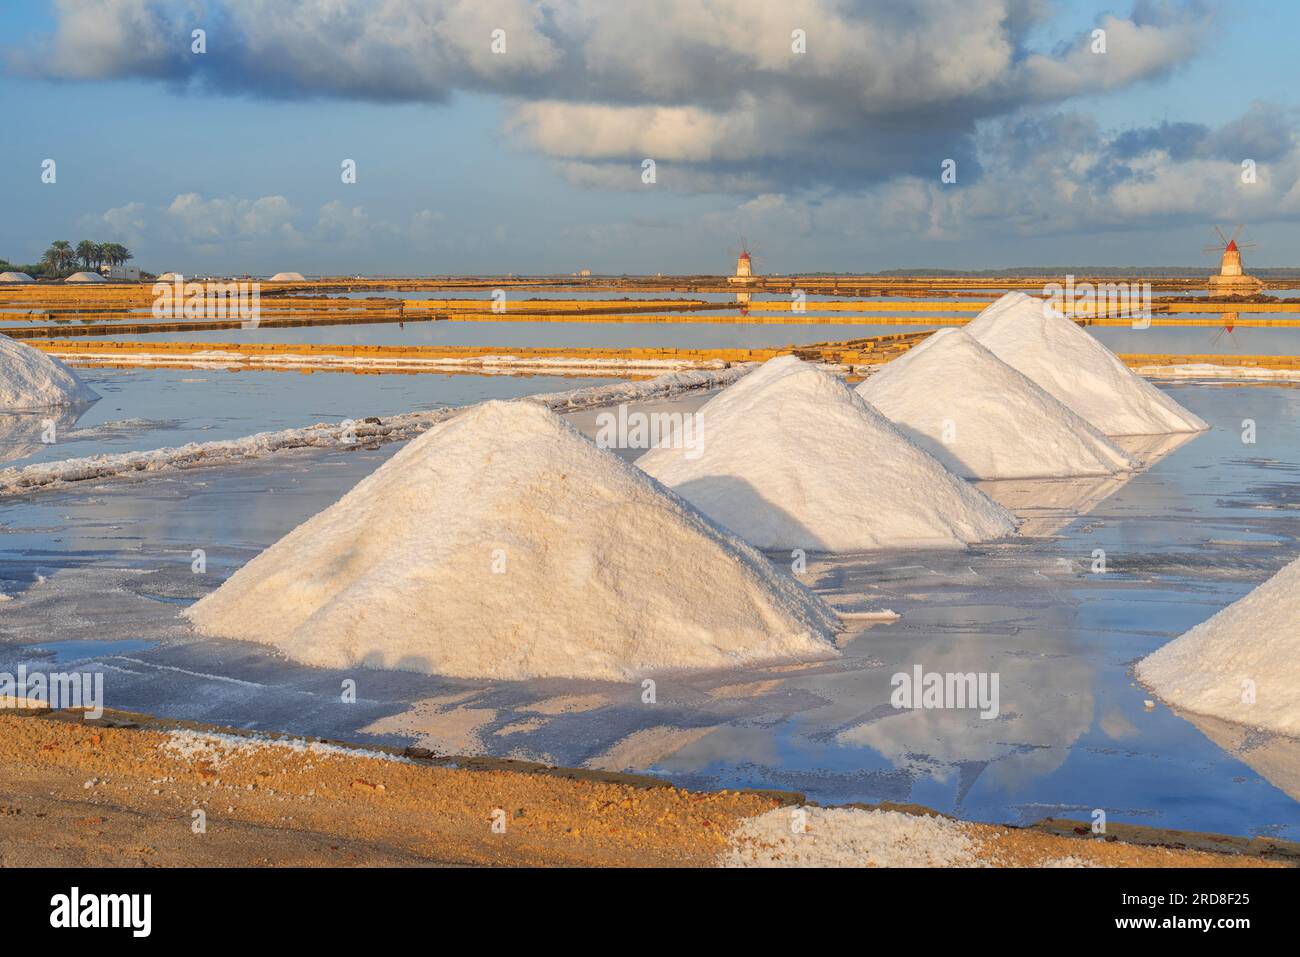 Piles of salts among salt flats with windmills in the background at sunset, Saline Ettore e Infersa, Marsala, province of Trapani Stock Photo